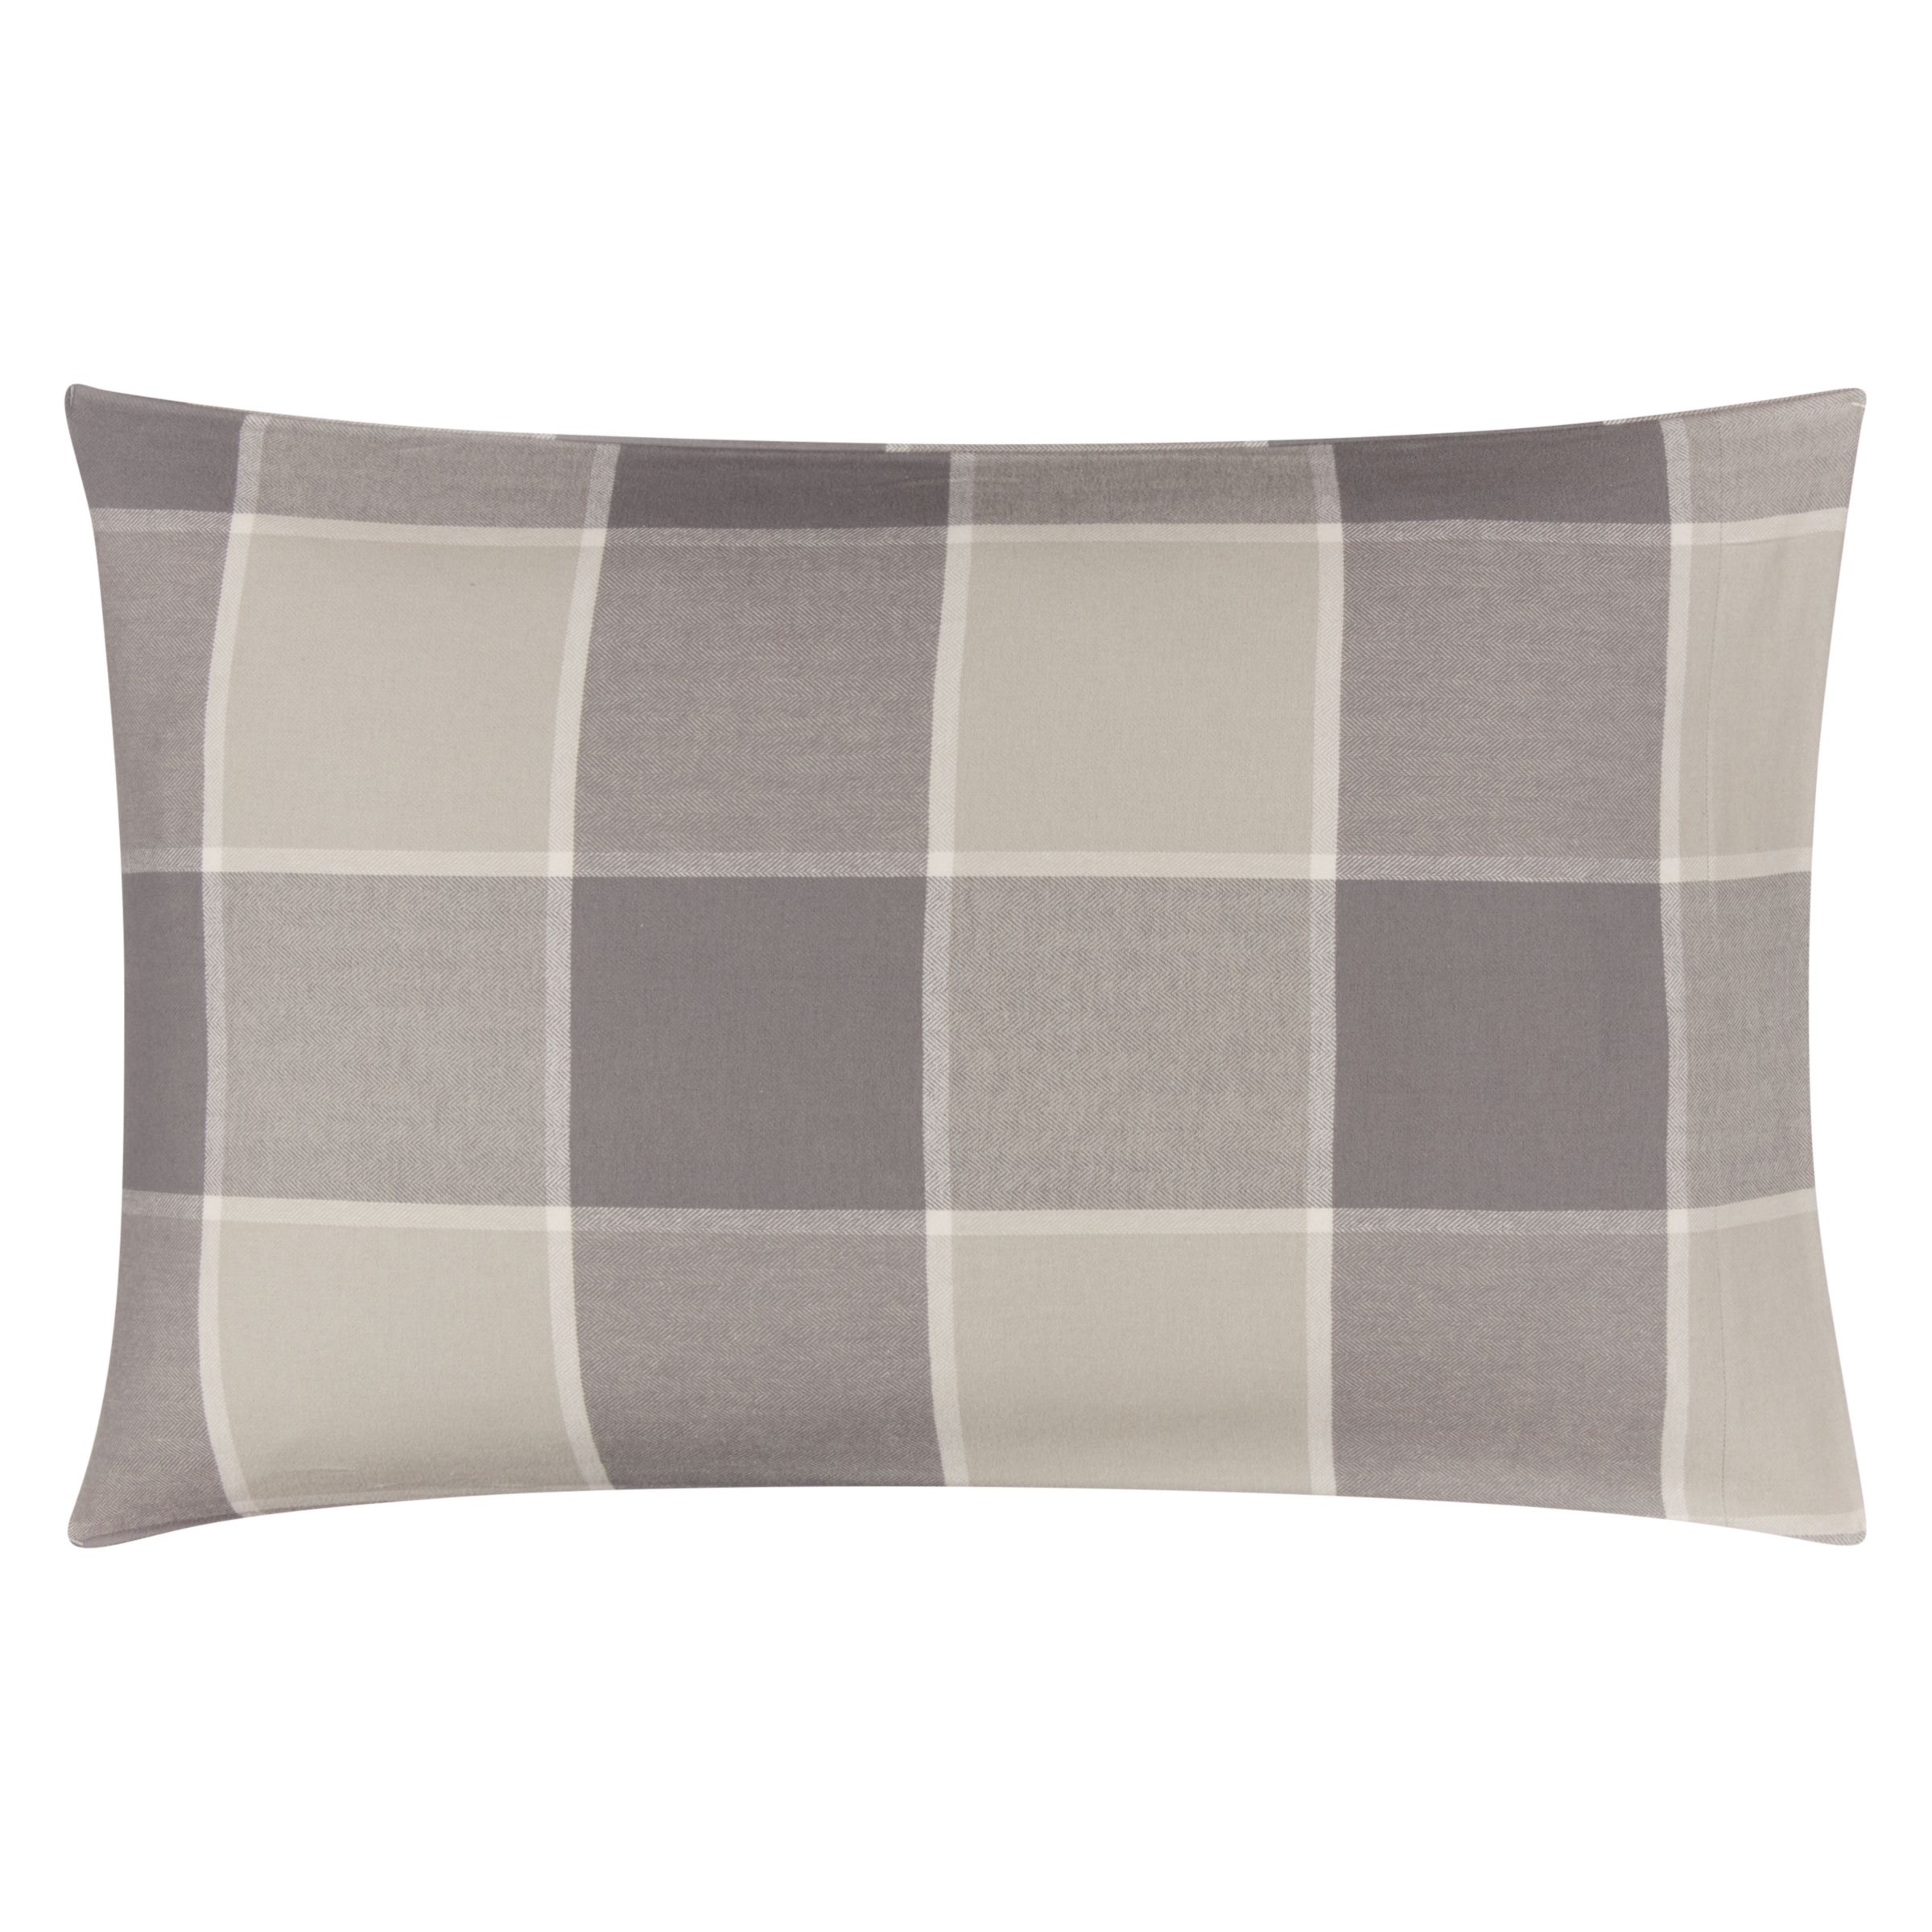 John Lewis & Partners Warm and Cosy Window Check Brushed Cotton Duvet ...